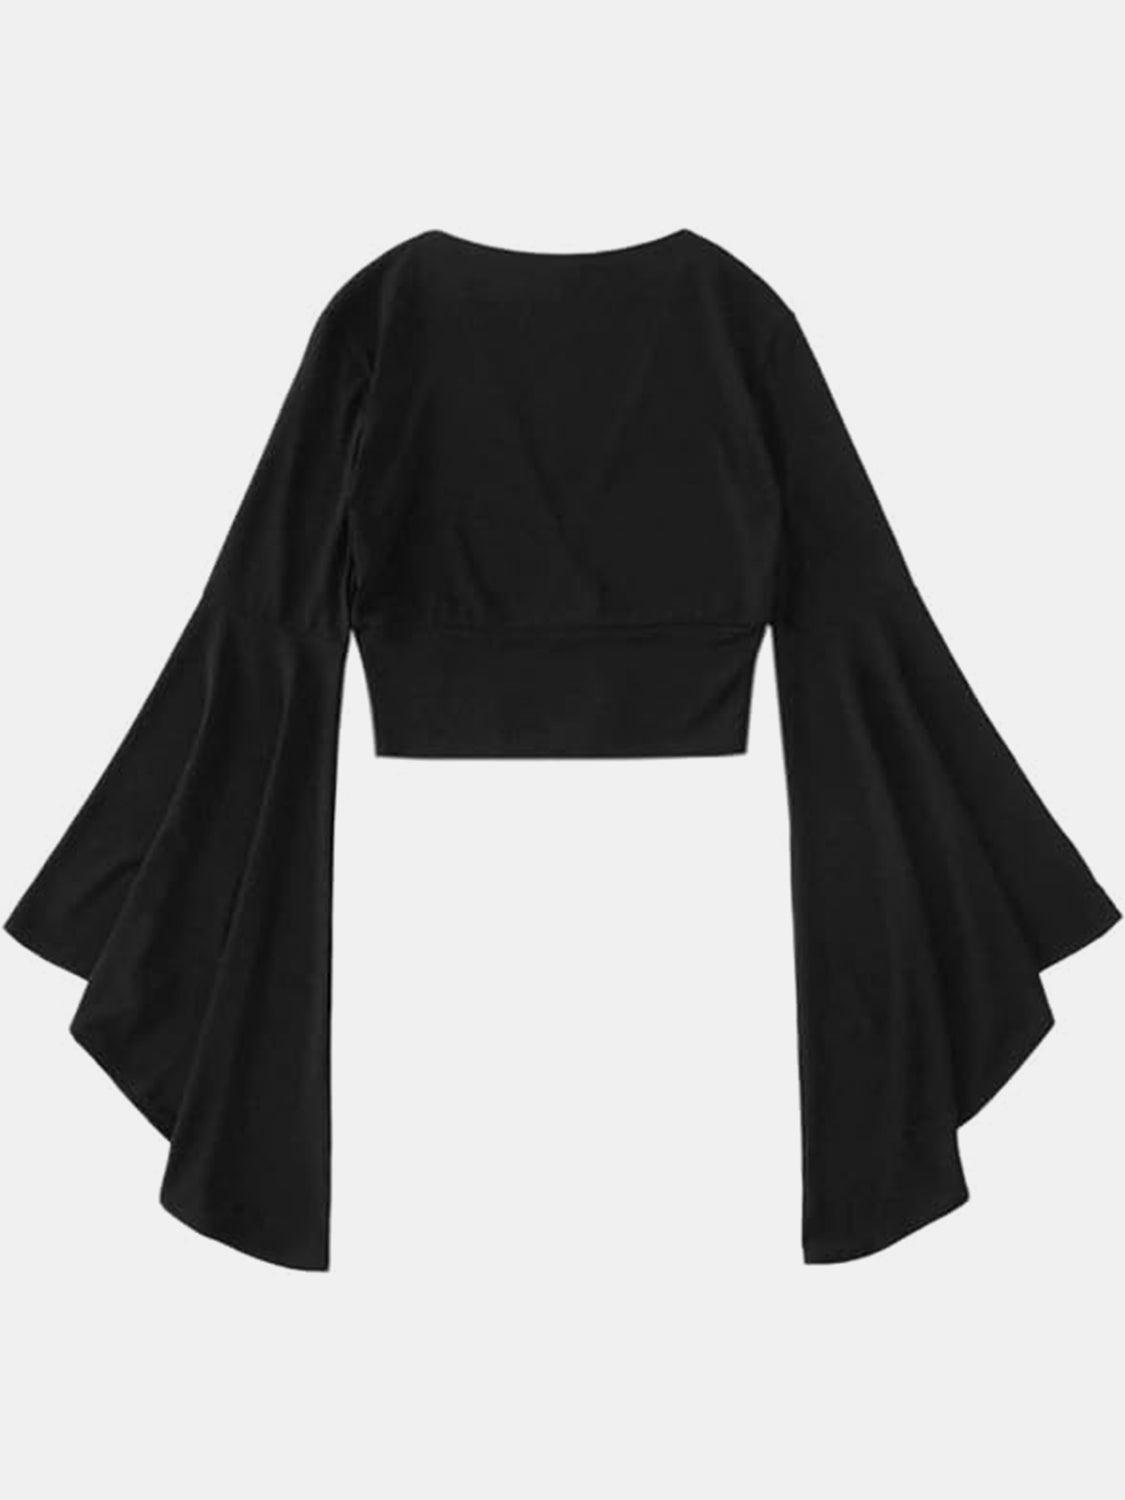 a cropped black top with bell sleeves